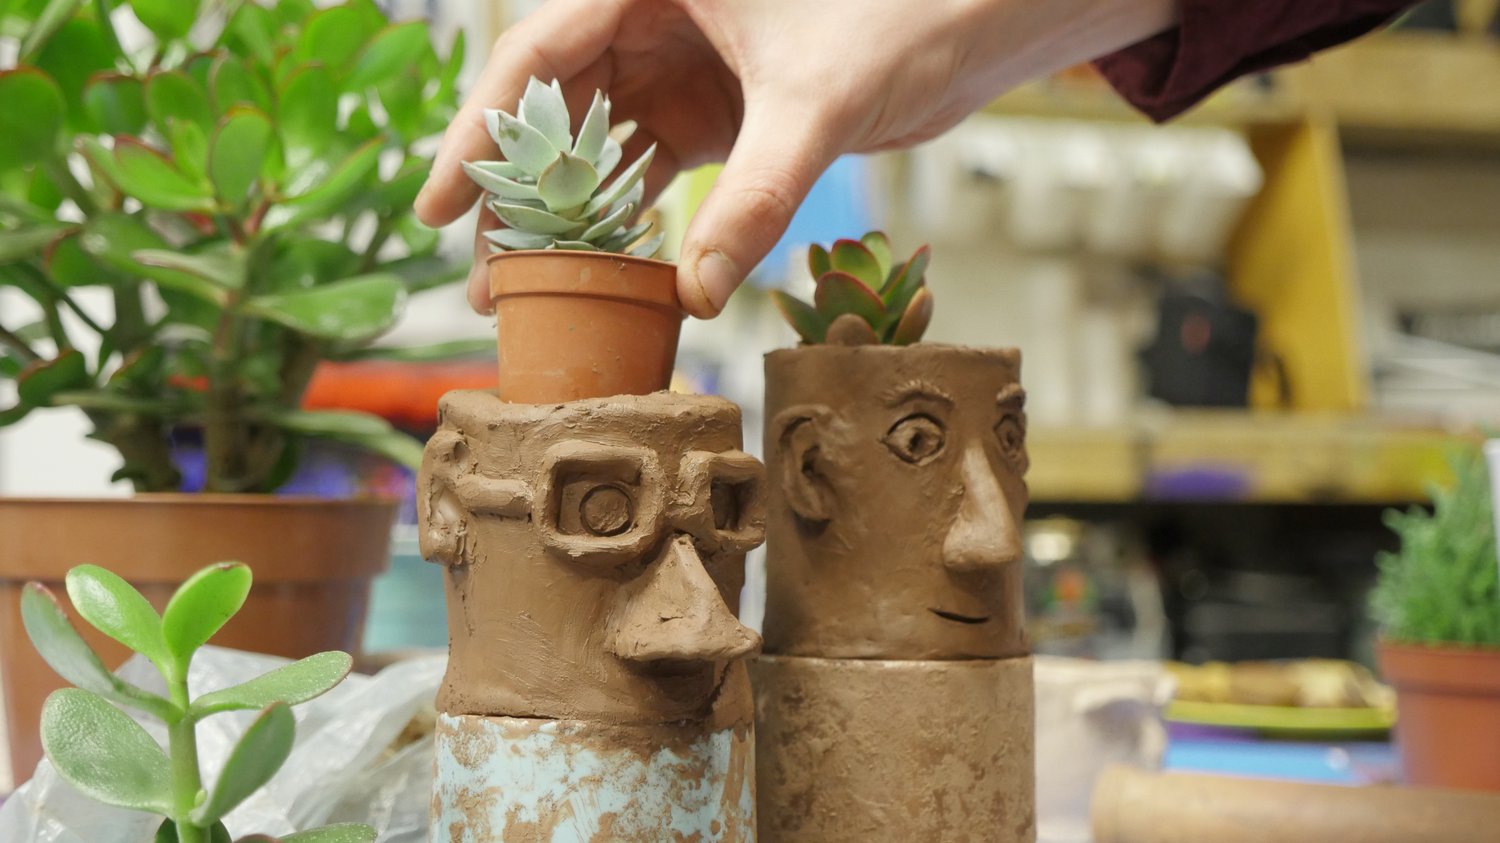 Image of Make A Pot Head At Home - Complete Pottery Kit With Plants & Video Workshop